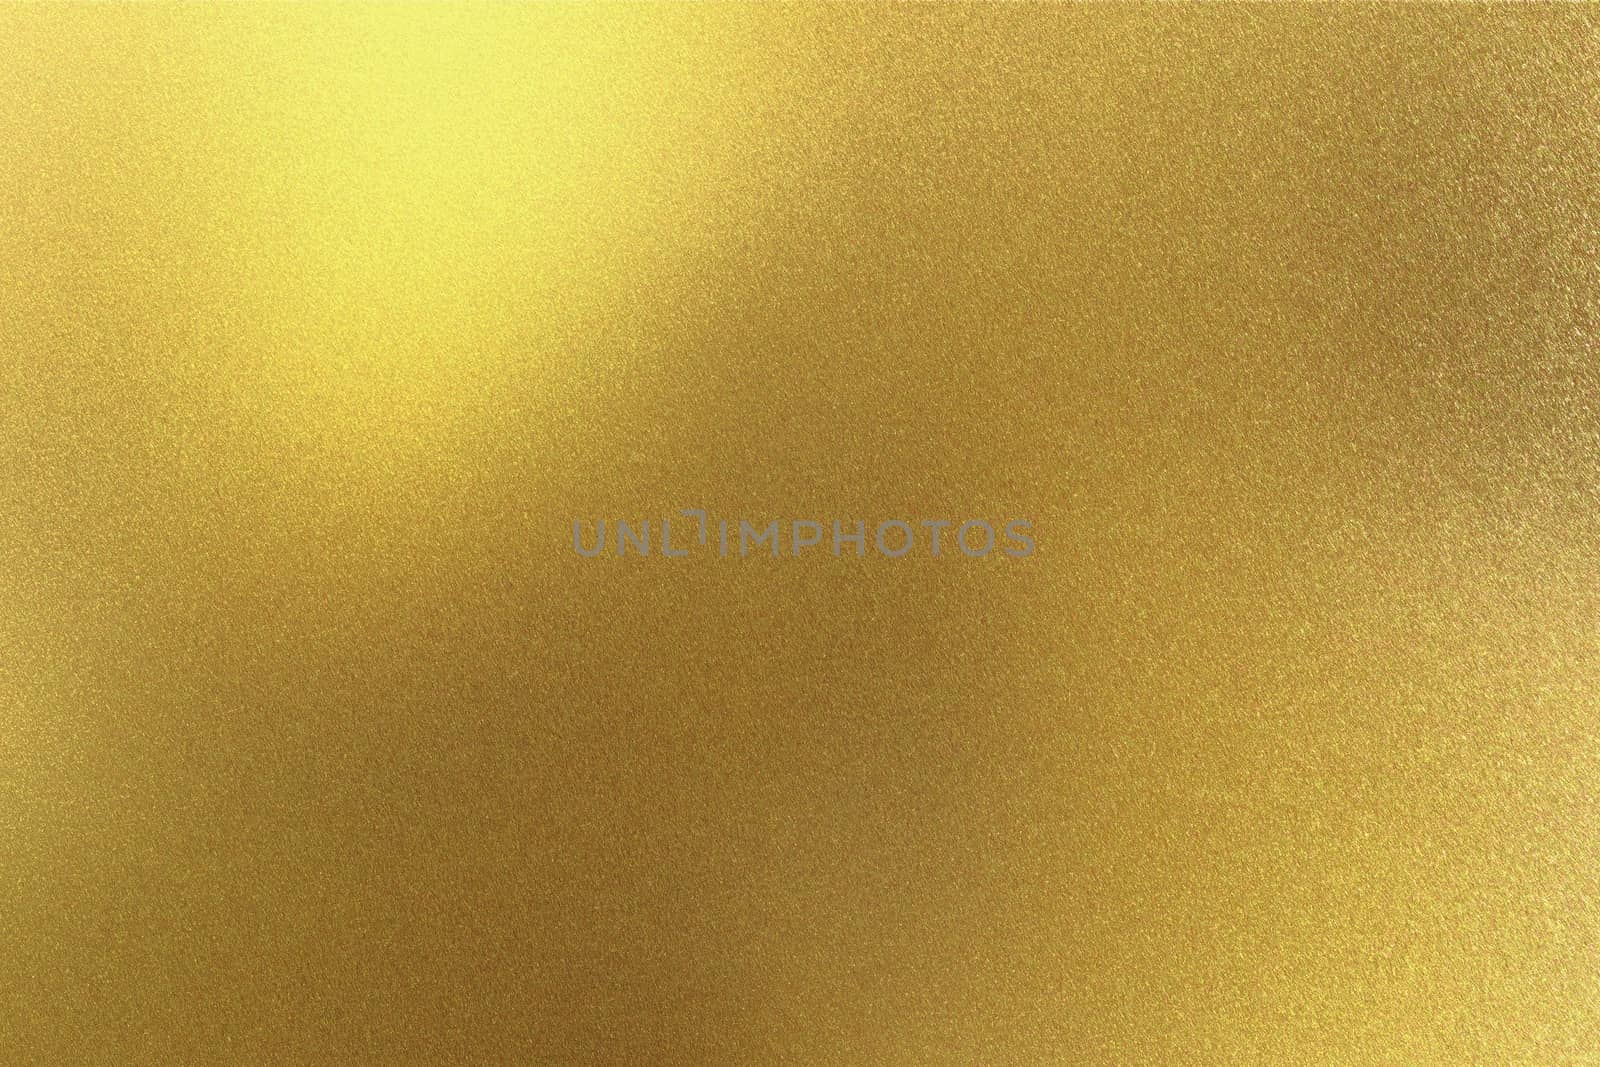 Abstract texture background, glowing golden metal plate